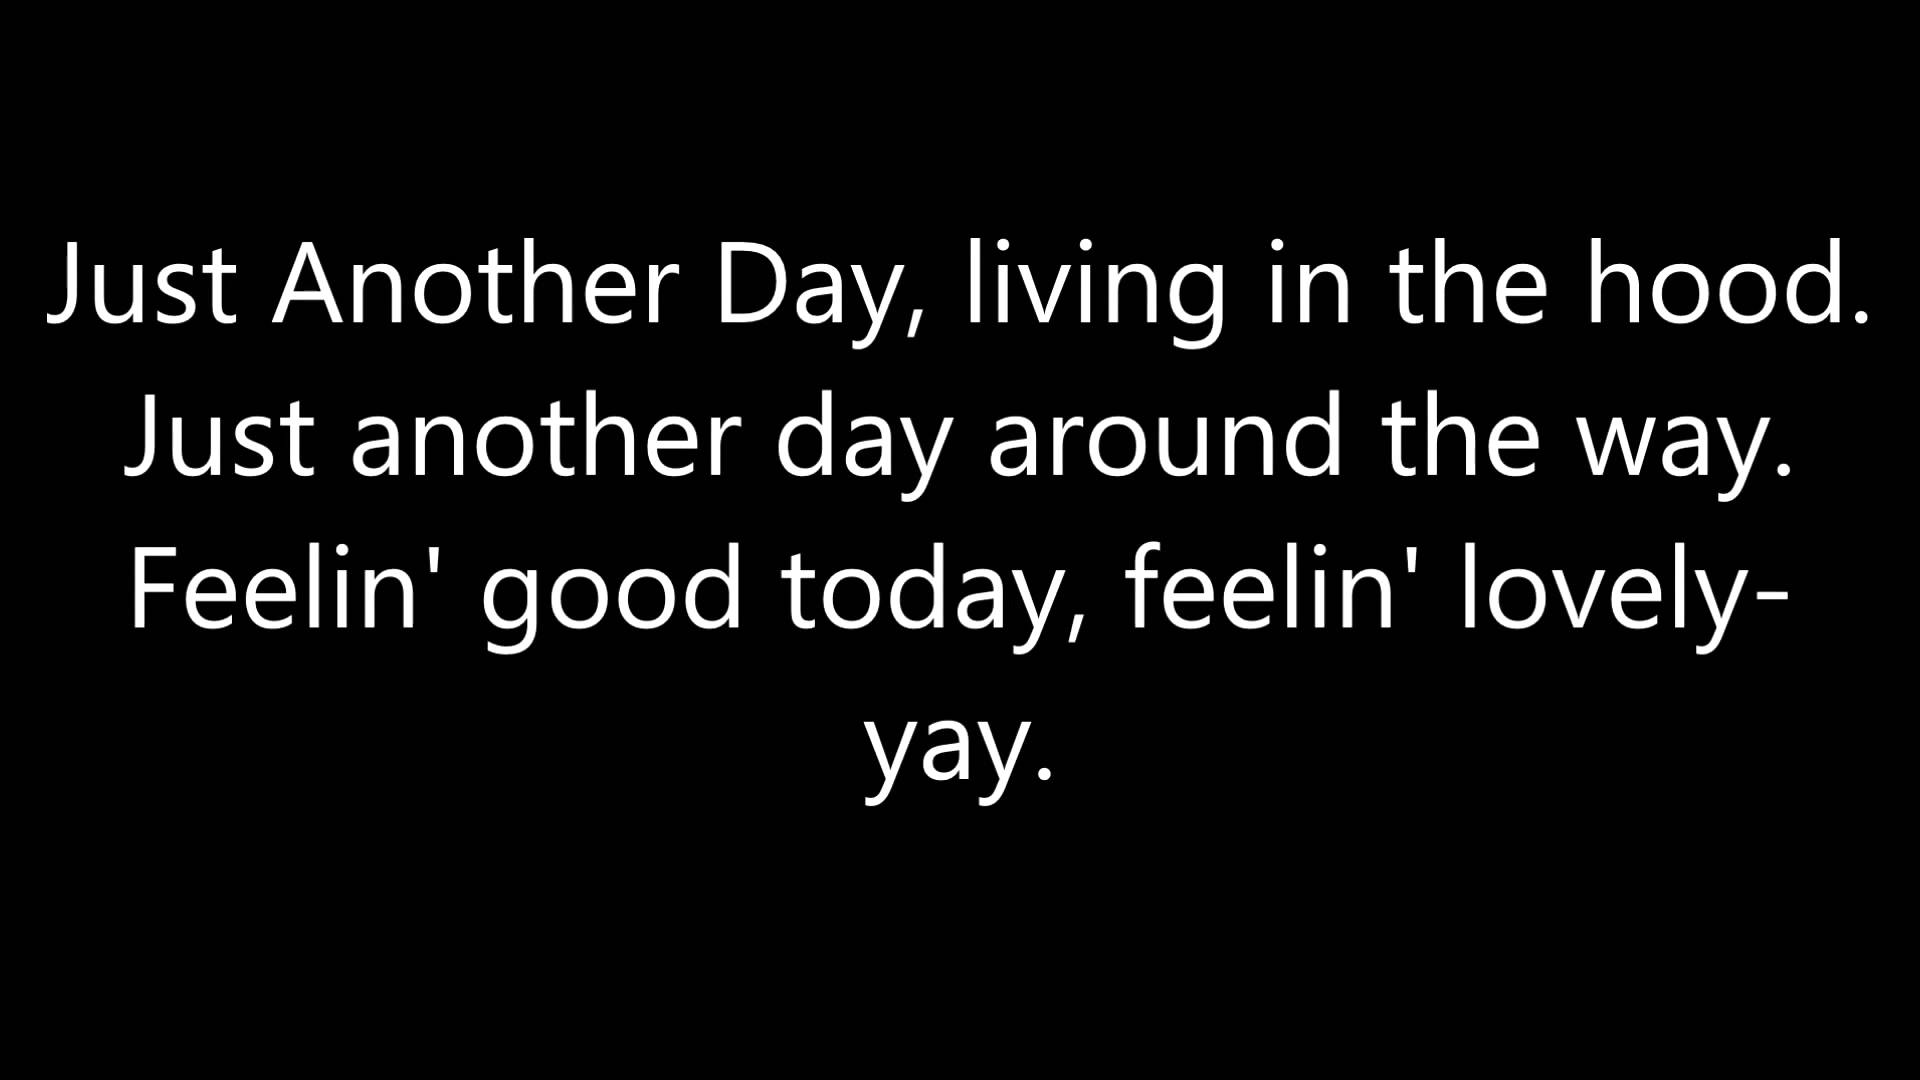 Queen Latifah - Just Another Day (Lyrics) - YouTube